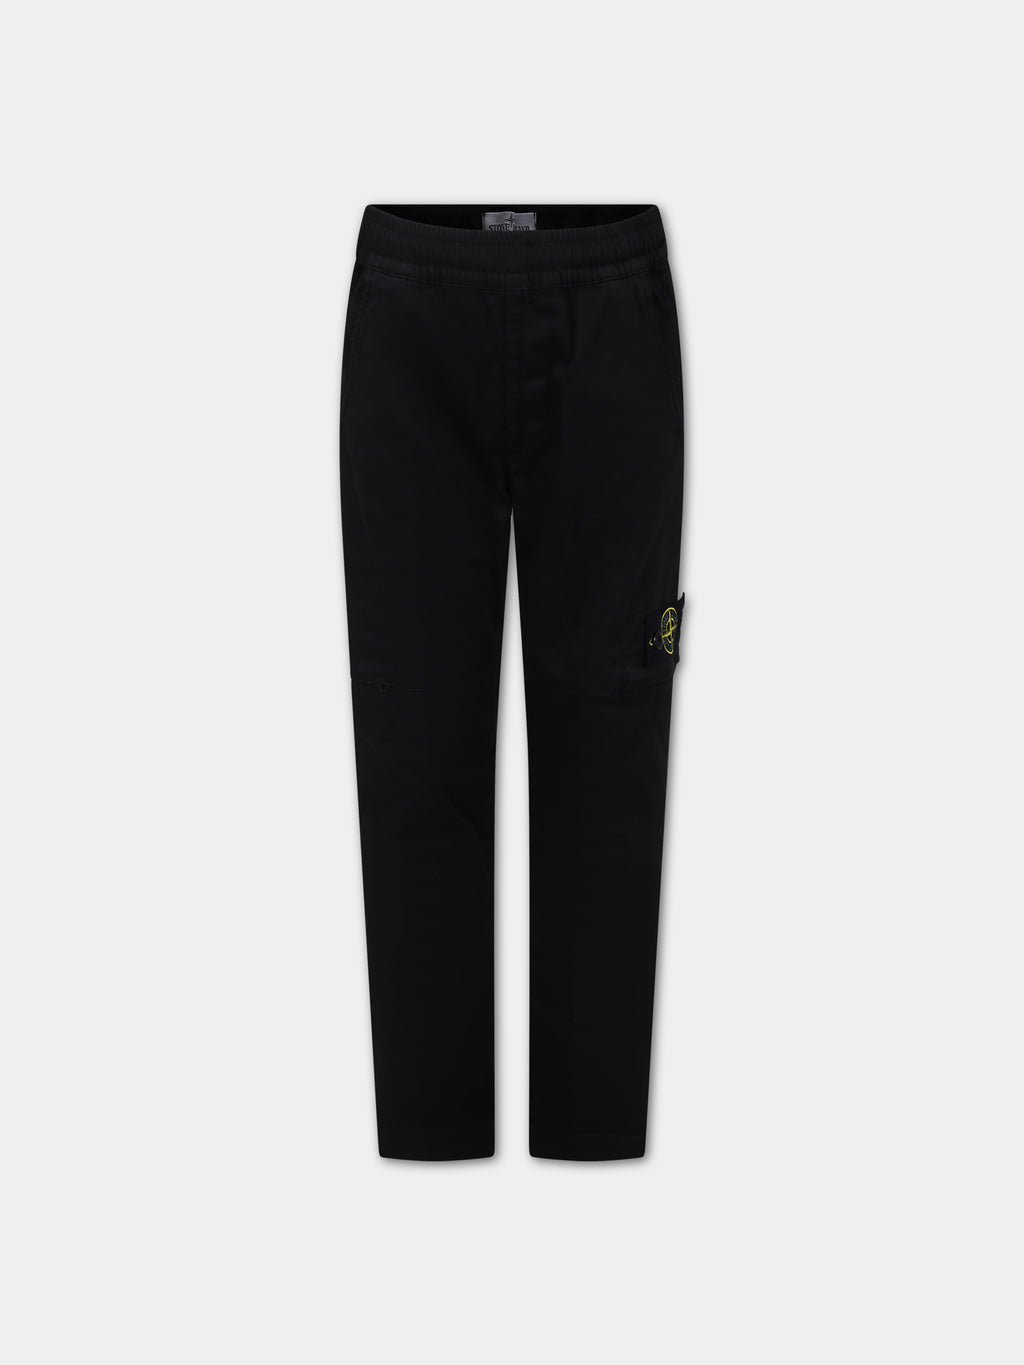 Black trousers for boy with compass